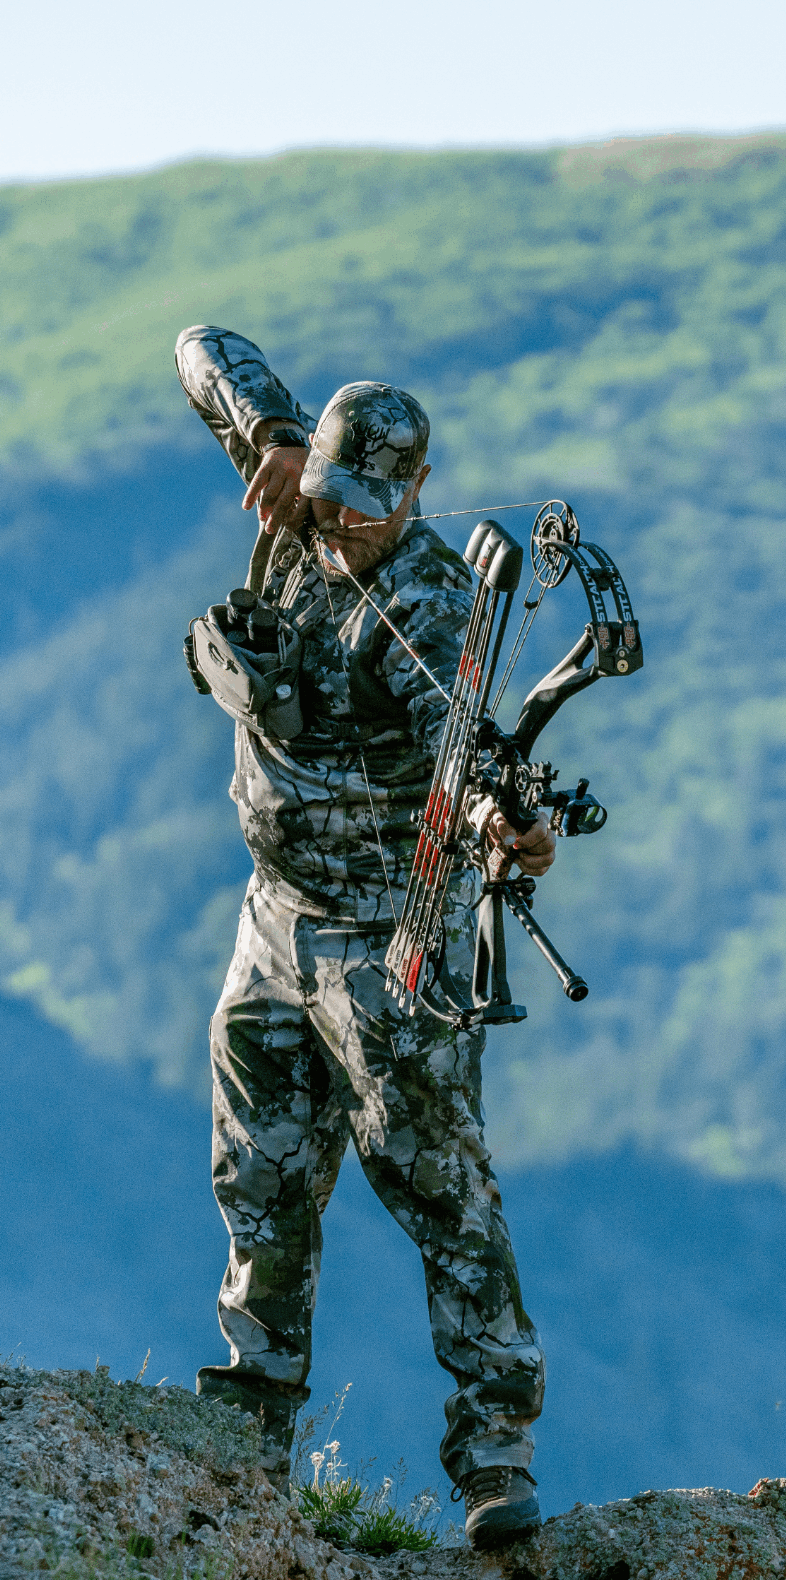 Camouflage Clothing and Hunting Gear